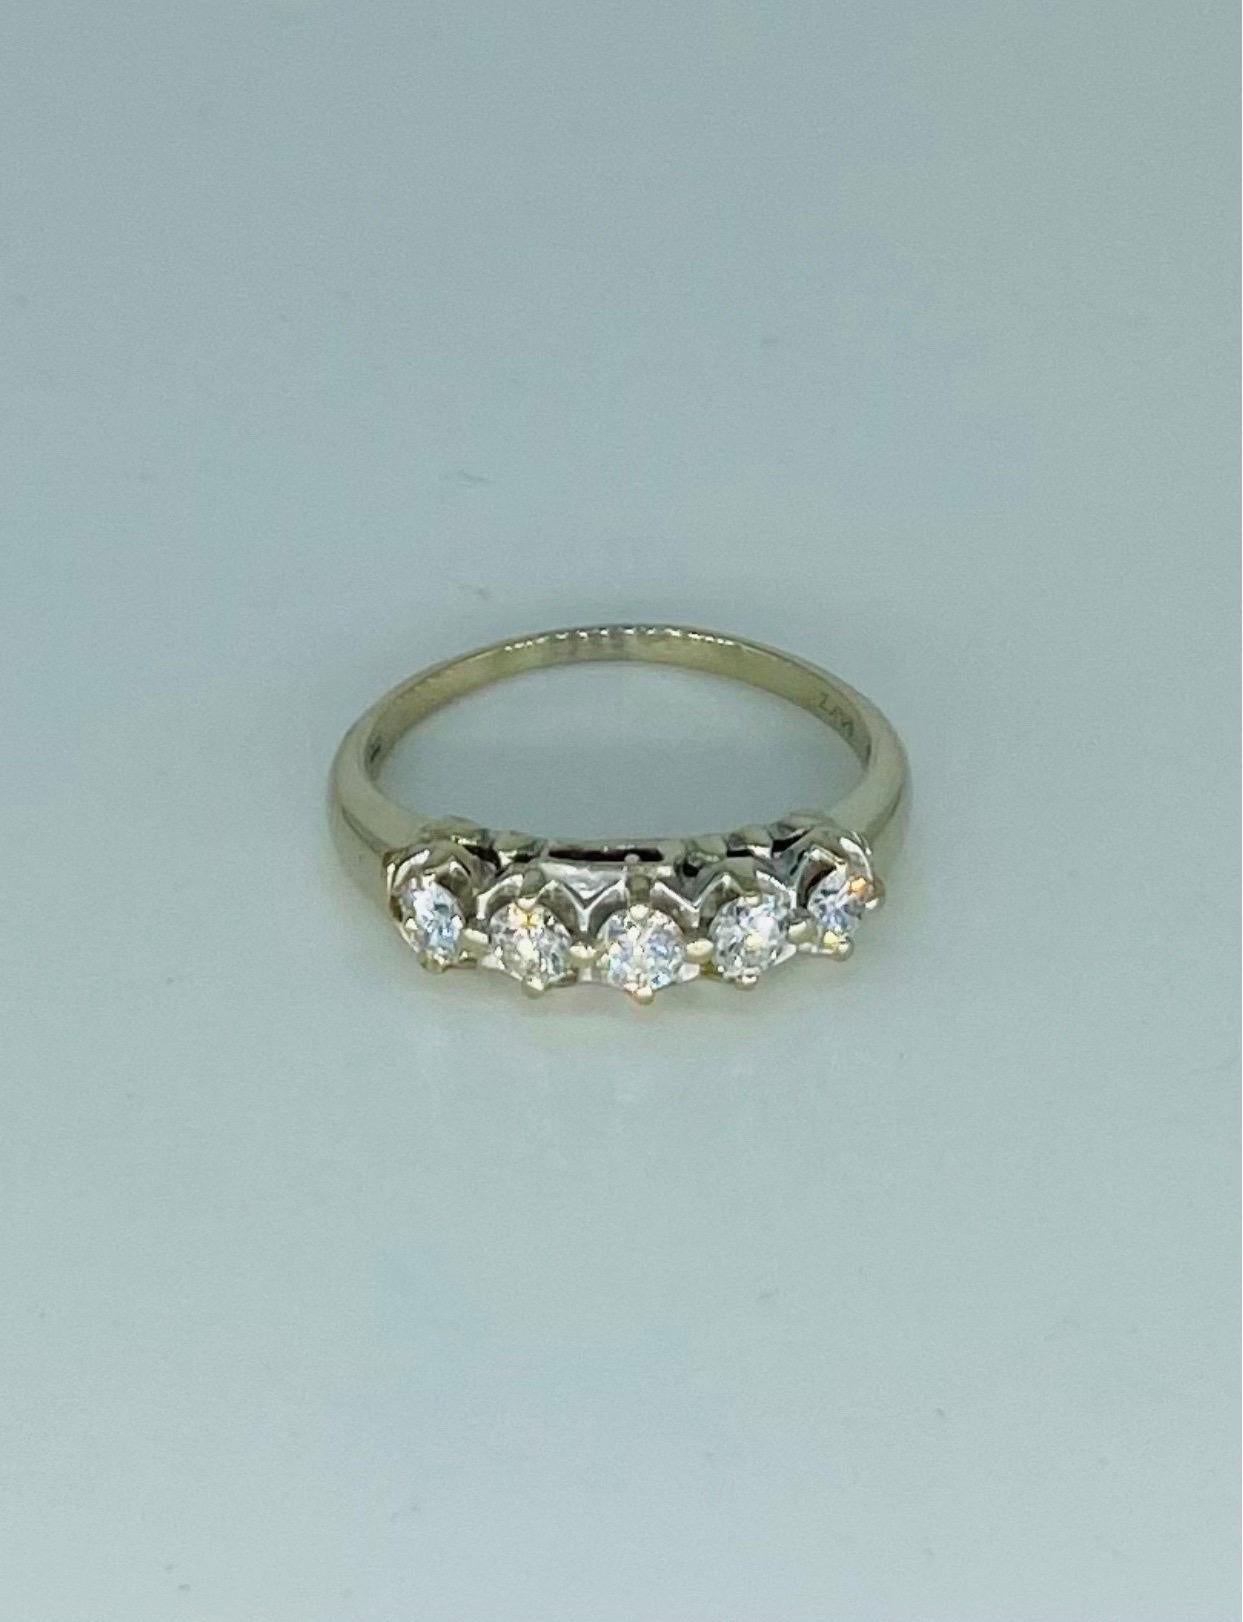 Vintage 0.60 Carat Four-Stone Half Eternity Ring 14k White Gold. The ring featured here includes 4 diamonds totaling approx 0.60 carat. Beautifully assembled and very high quality and clarity Diamonds. The ring is a a size 7.5 and weights 2.3 grams